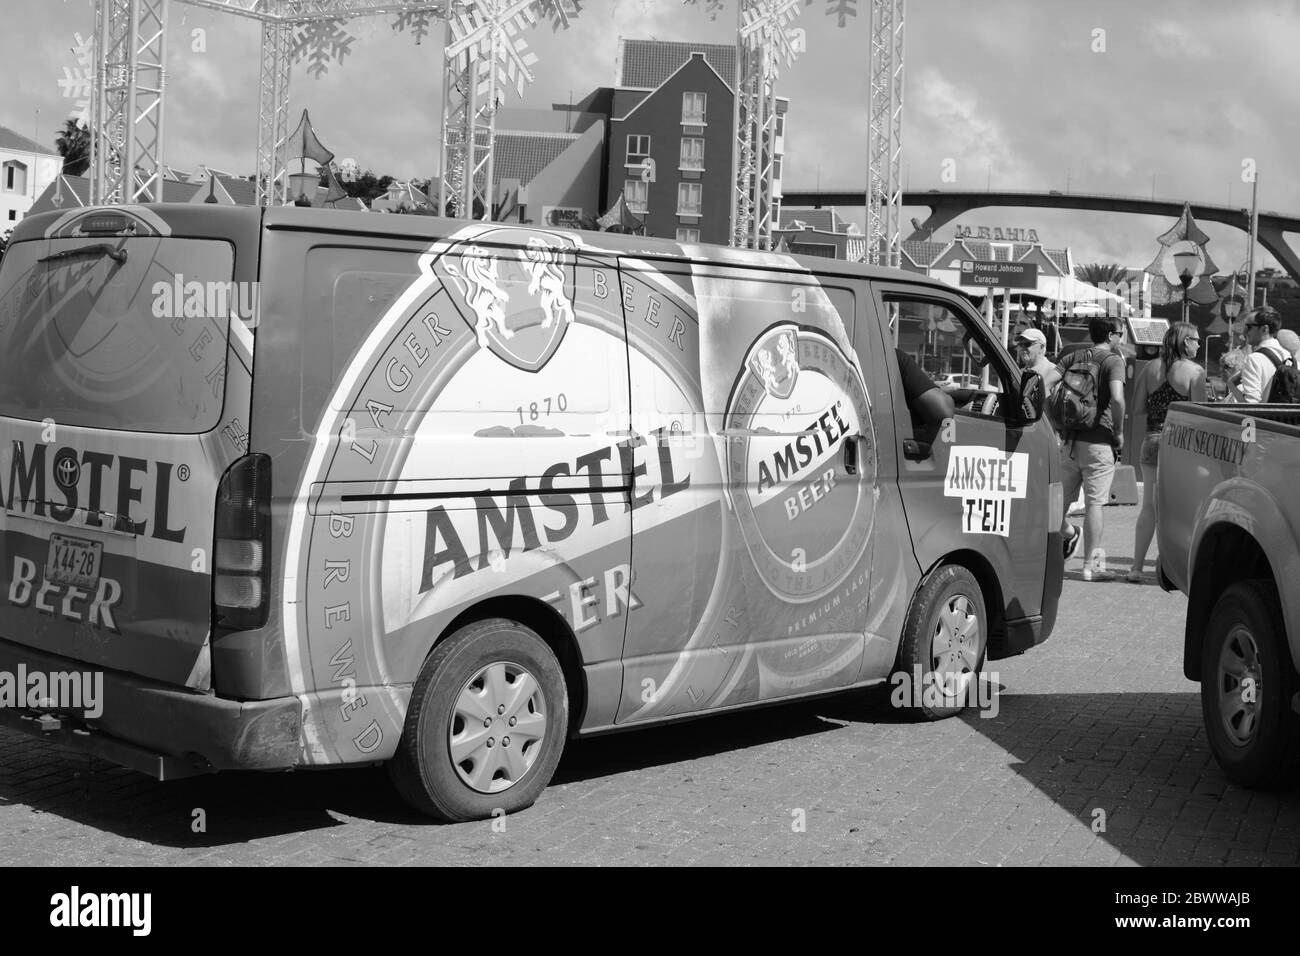 Amstel Beer van Curacao van drink sign signs artwork art black and white local drinking posh smart bottle bottles alcohol locals fiesta style outside Stock Photo